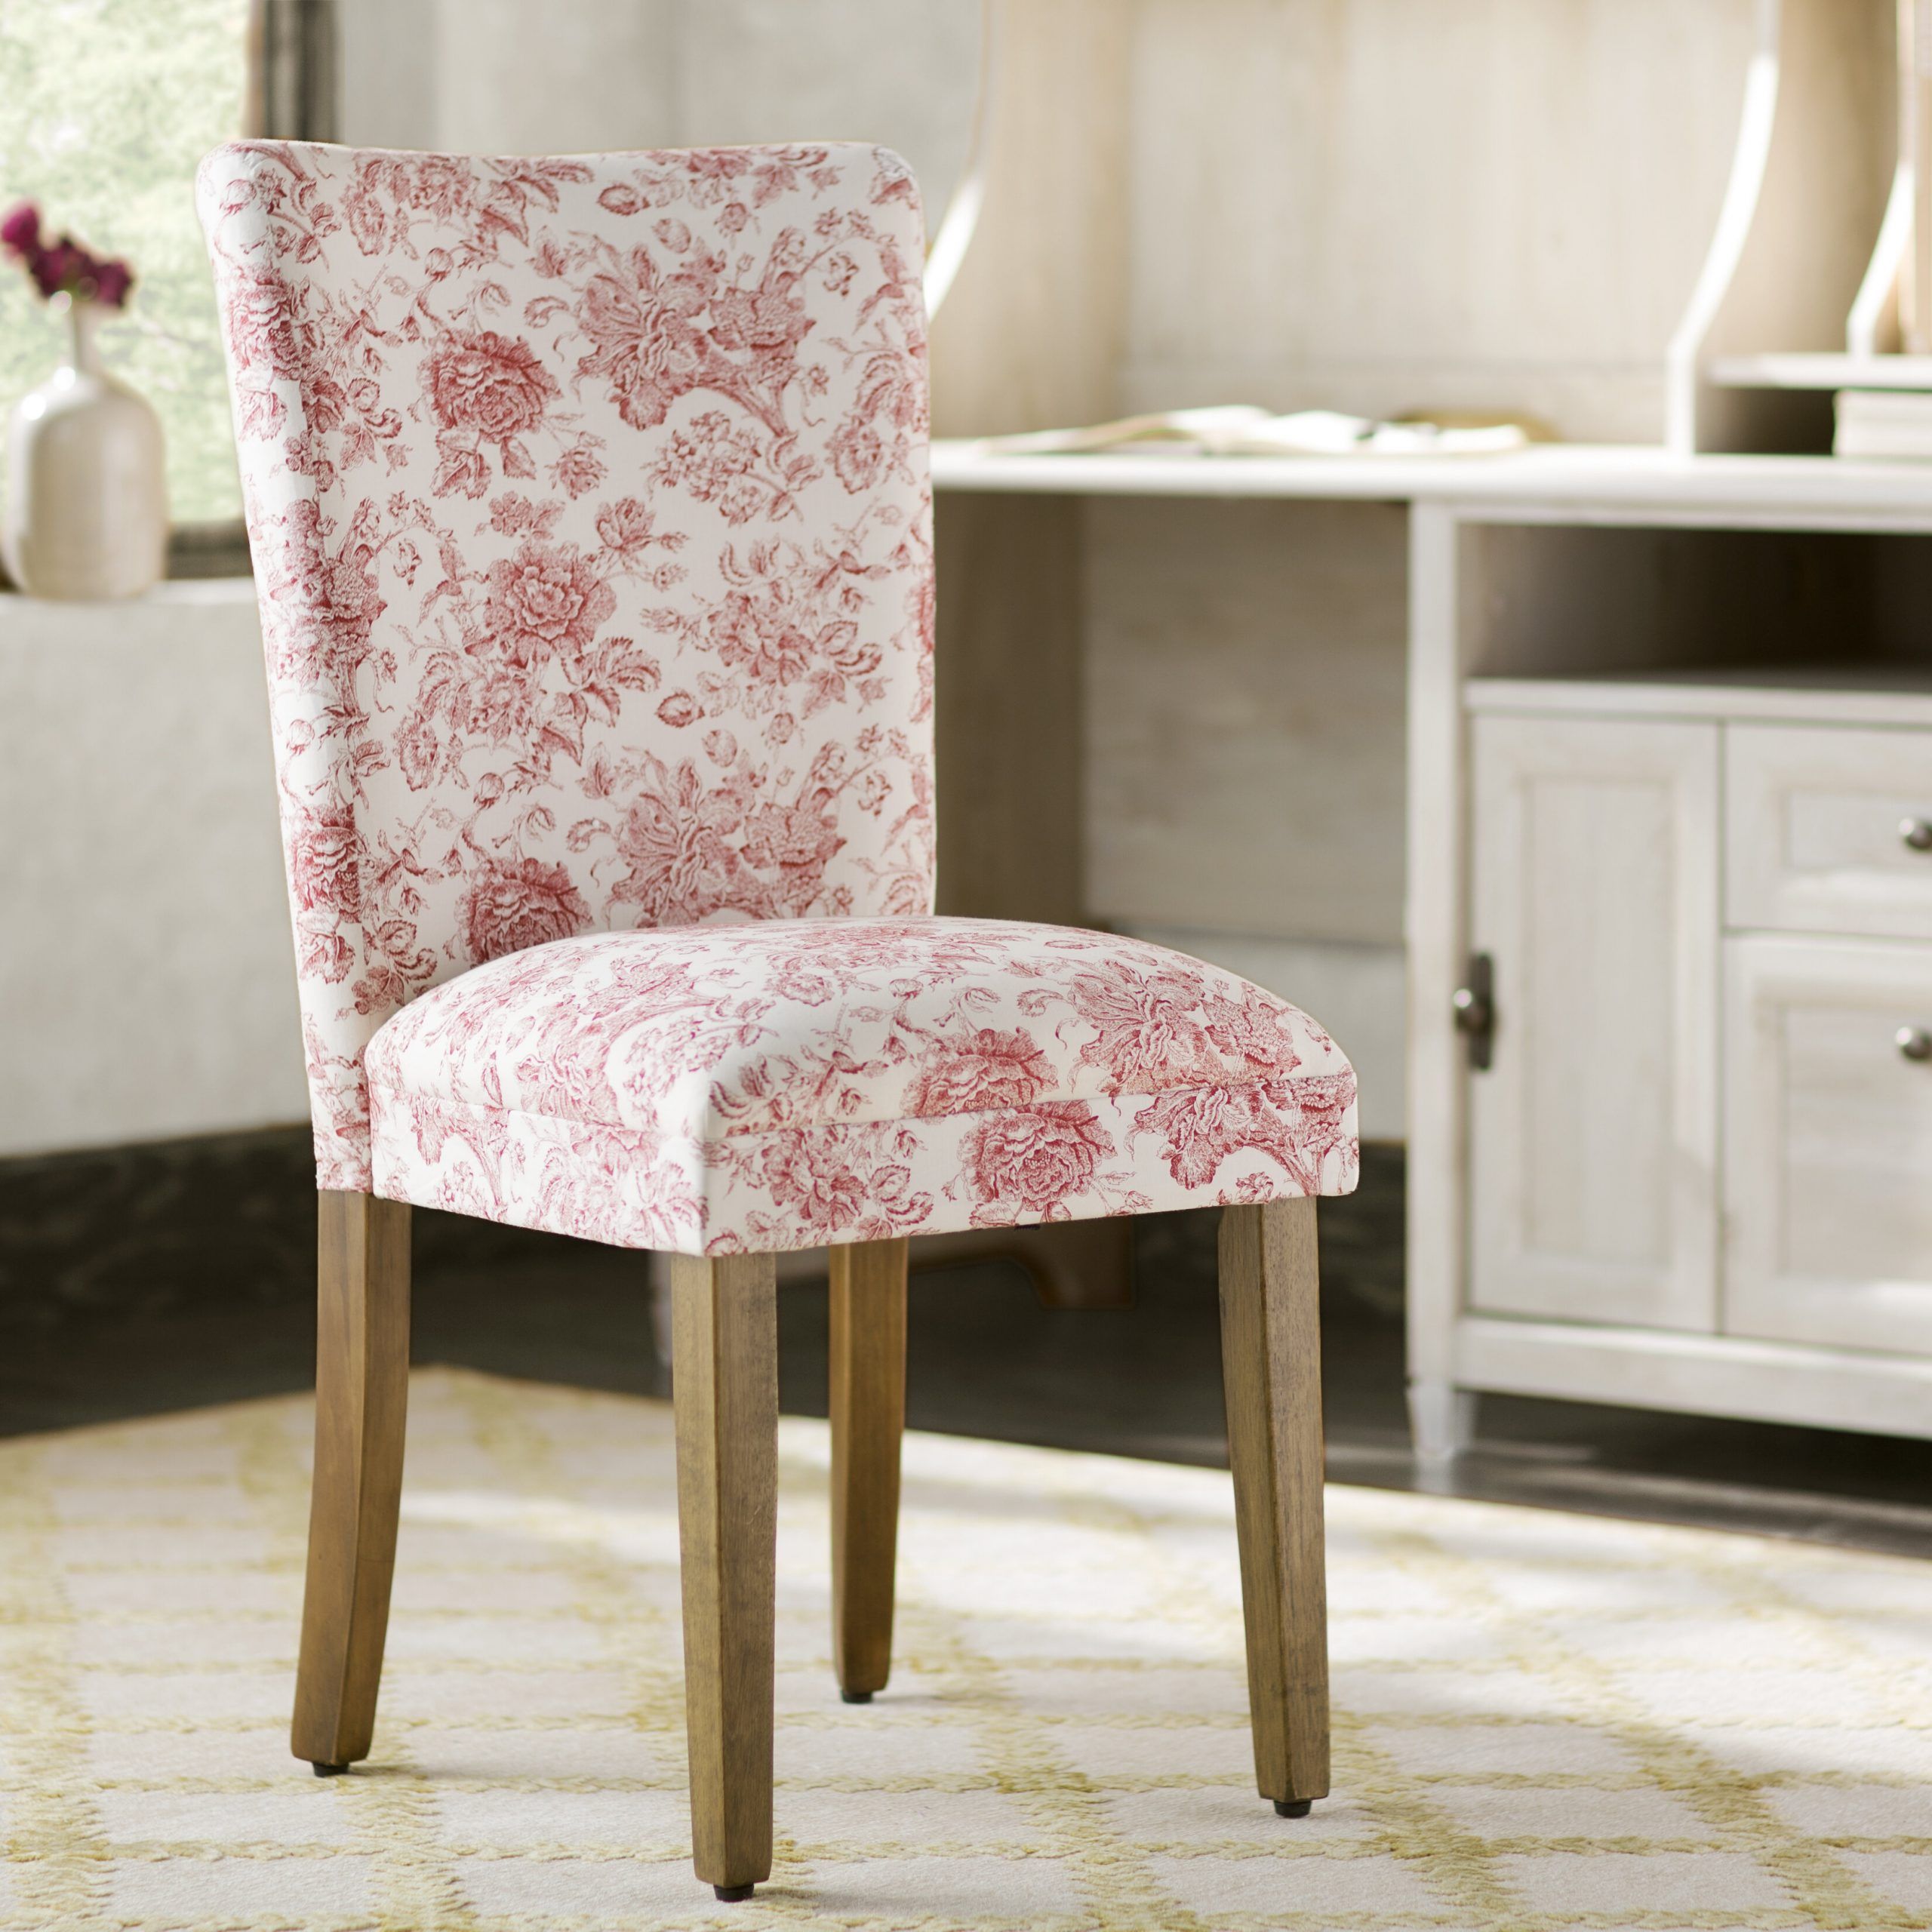 Floral Accent Chairs Under $150 You'Ll Love In 2021 | Wayfair Throughout Ansby Barrel Chairs (View 6 of 15)